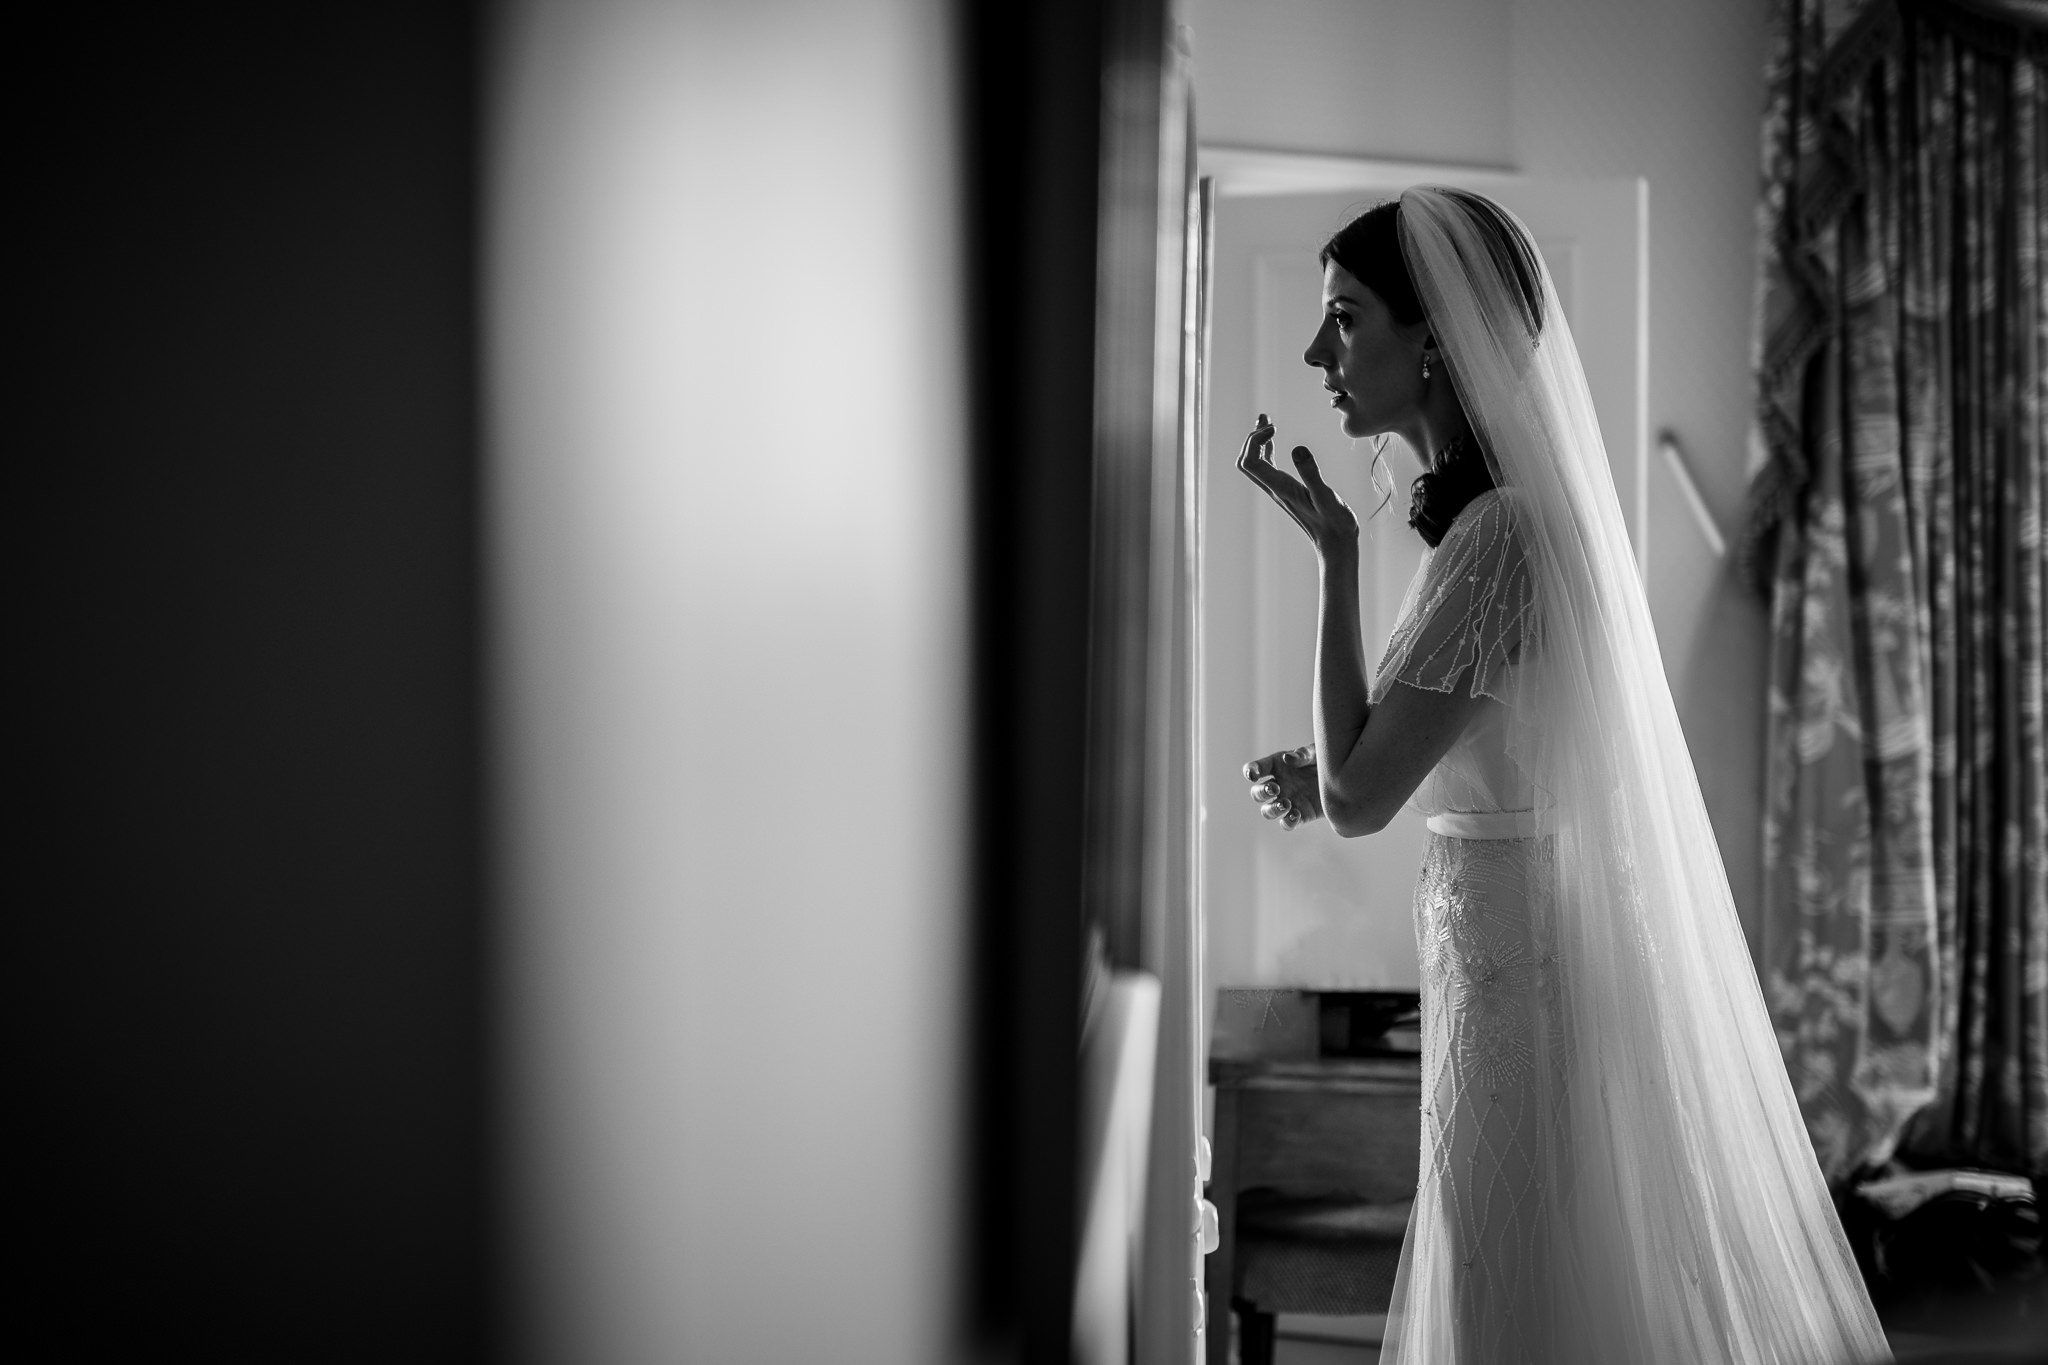  Bride looks at herself in the mirror 